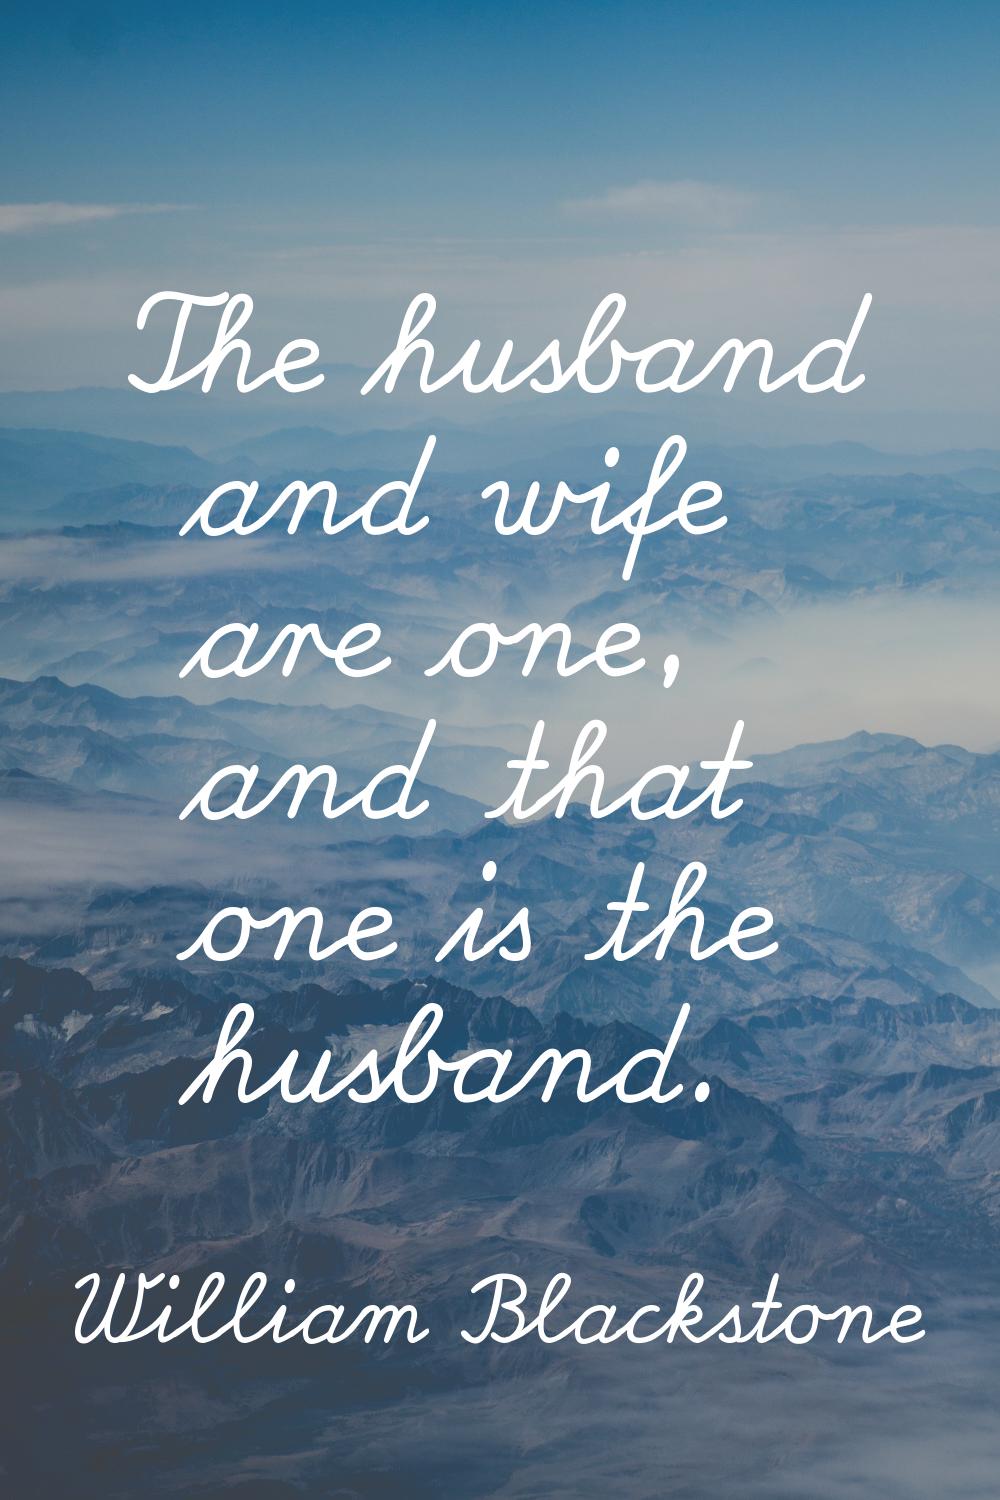 The husband and wife are one, and that one is the husband.